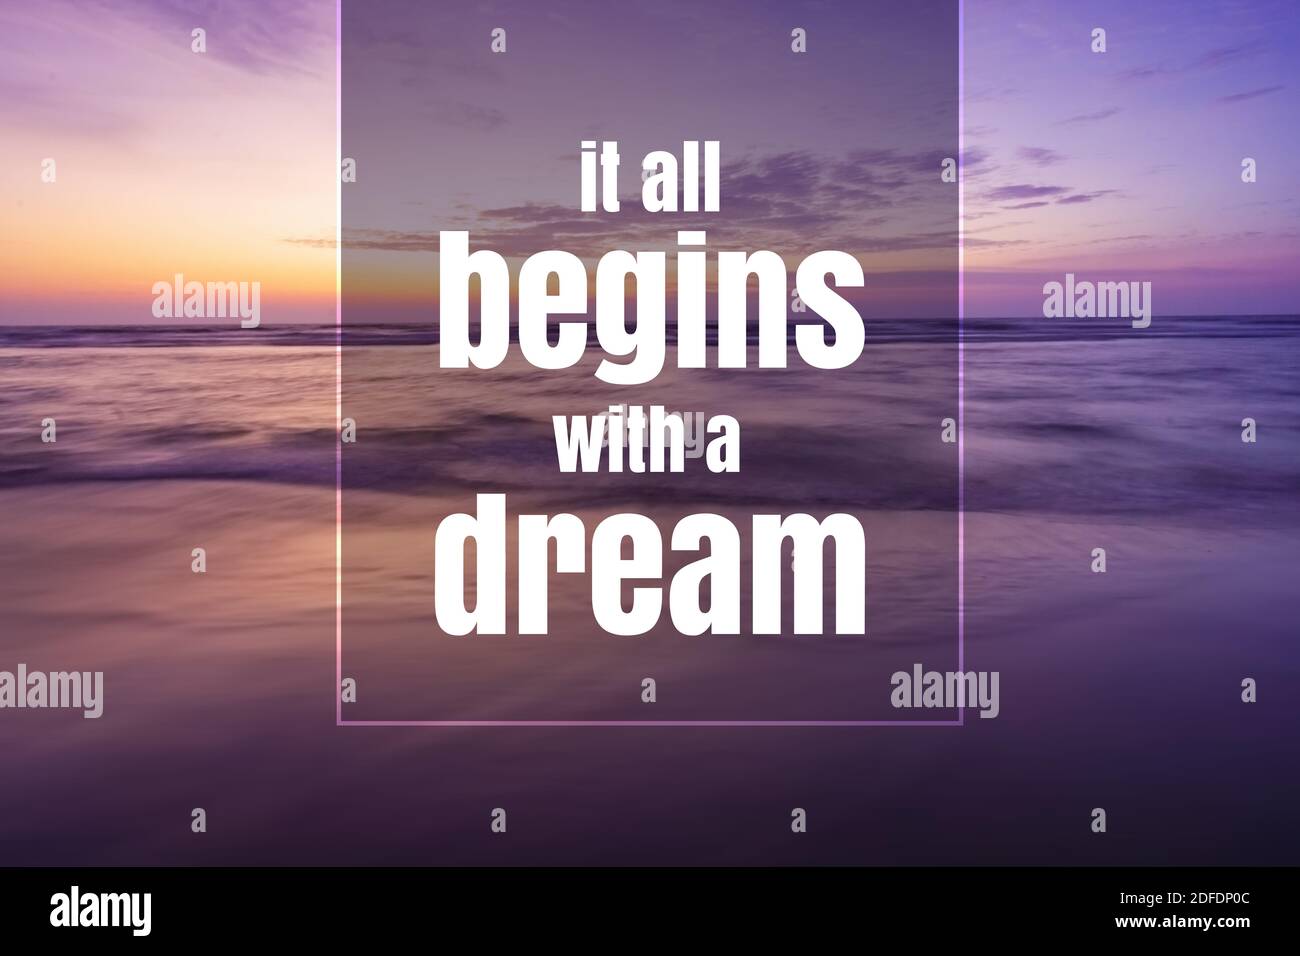 Inspirational and Motivational Quote. It All Begins With a Dream. Sunset Background. Stock Photo